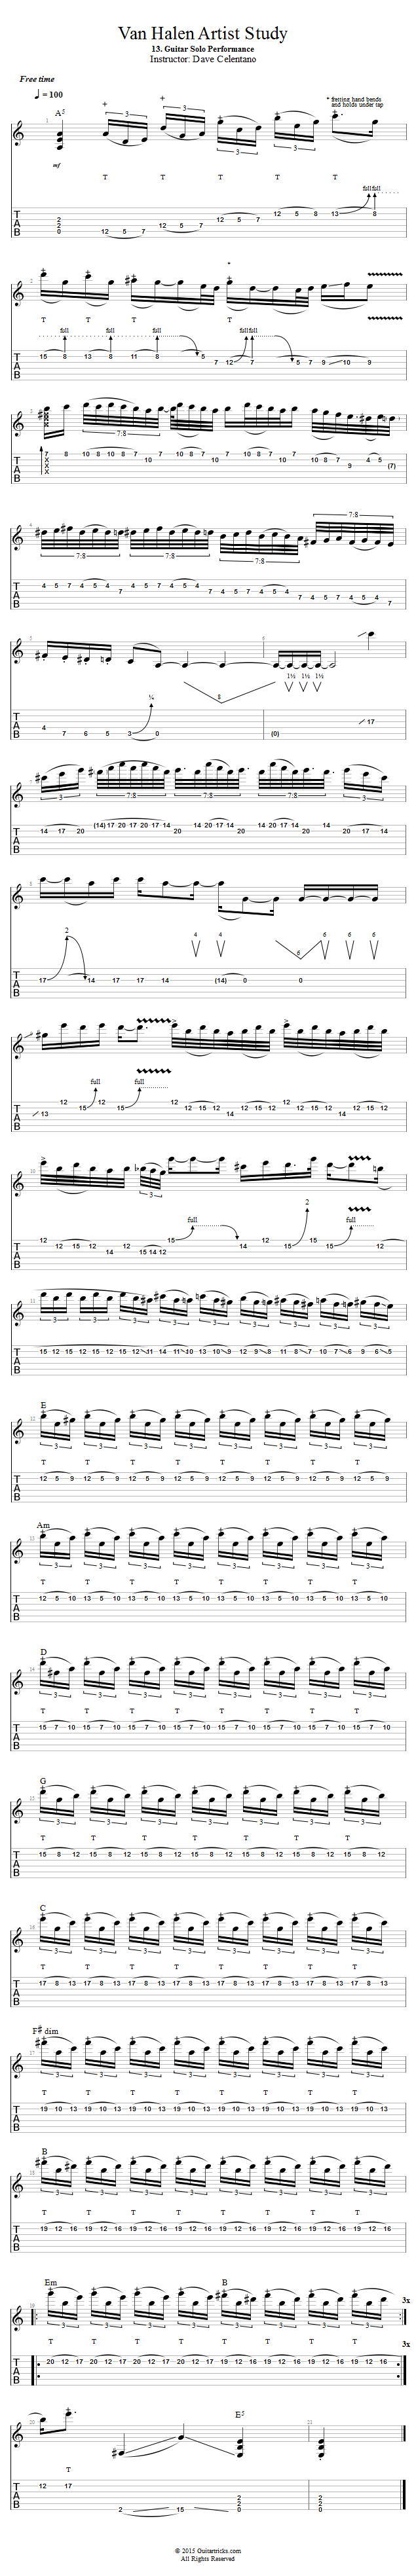 Guitar Solo Performance song notation